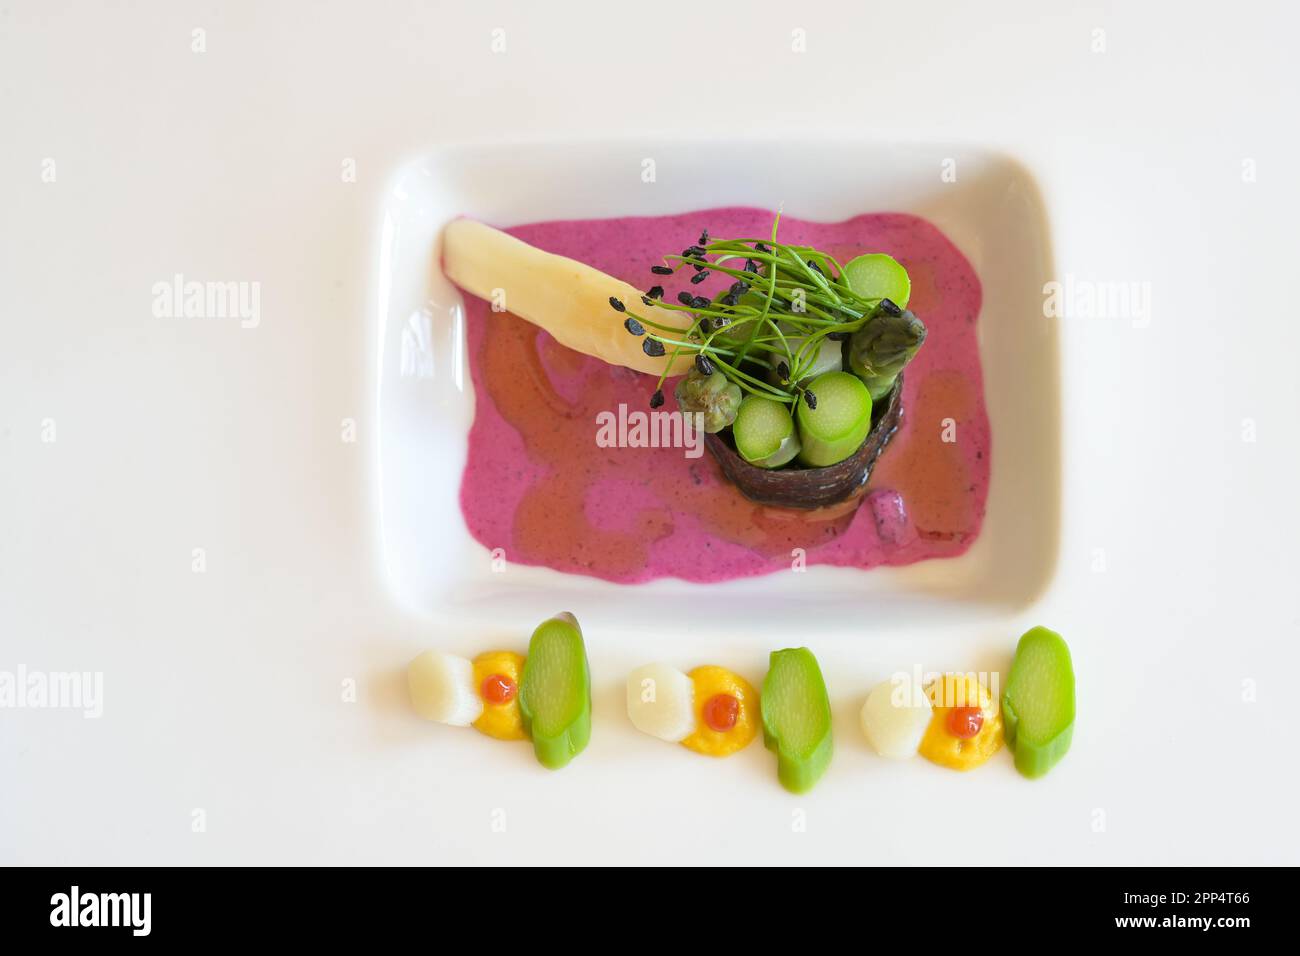 Vegetarian gourmet dish made of asparagus wrapped in nori seaweed, beetroot dressing and leek sprouts served on a white plate, high angle view from ab Stock Photo